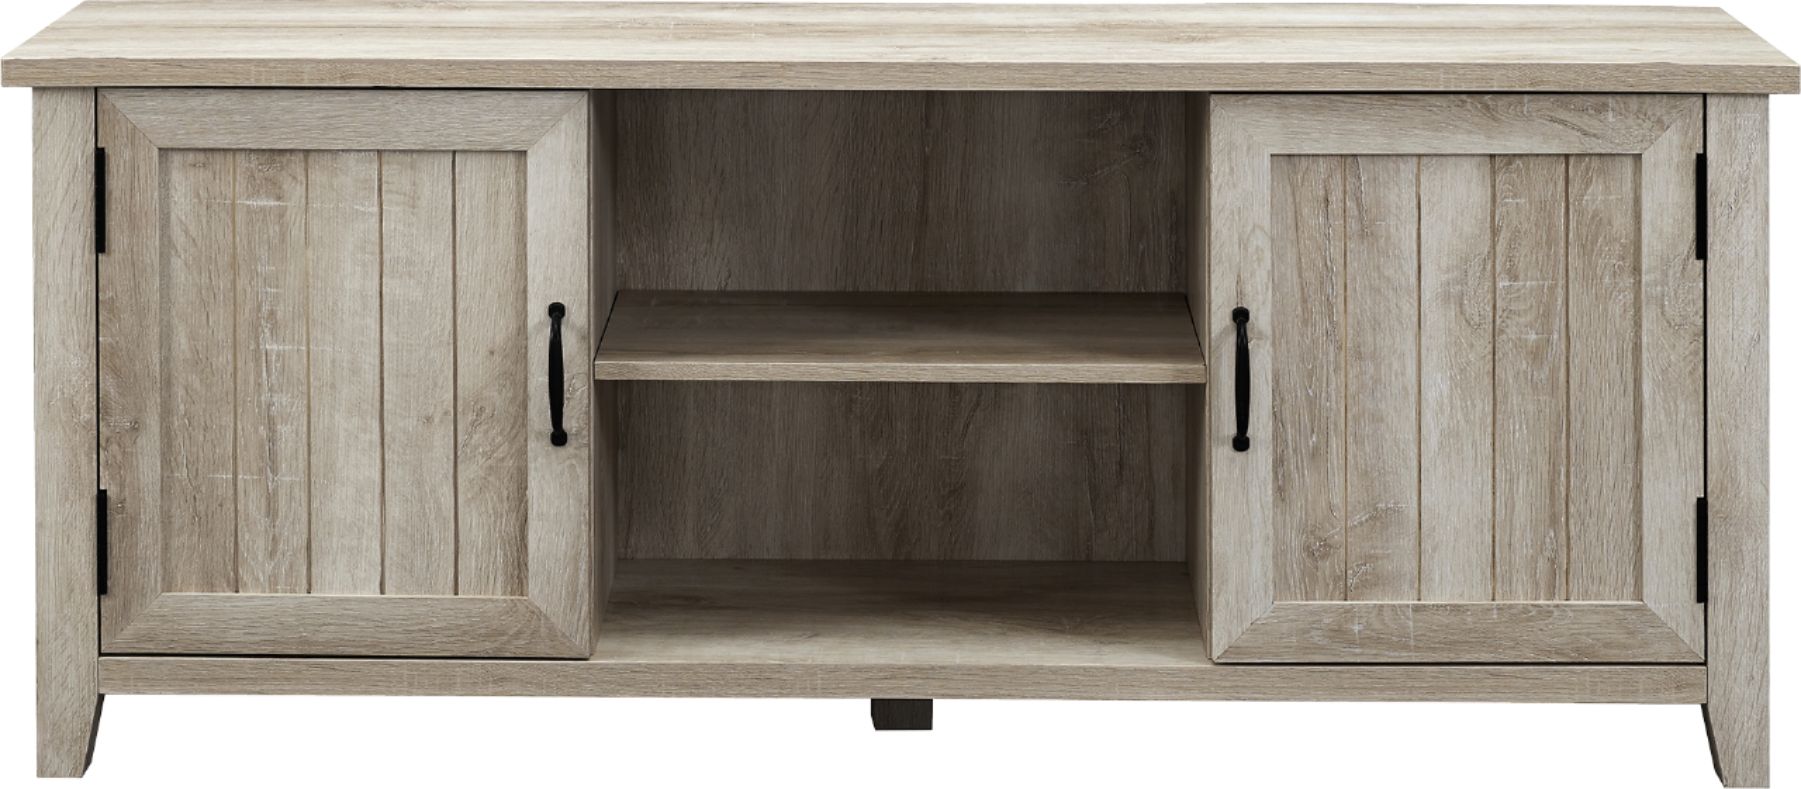 Walker Edison - Modern Farmhouse TV Stand for Most TVs Up to 64" - White Oak